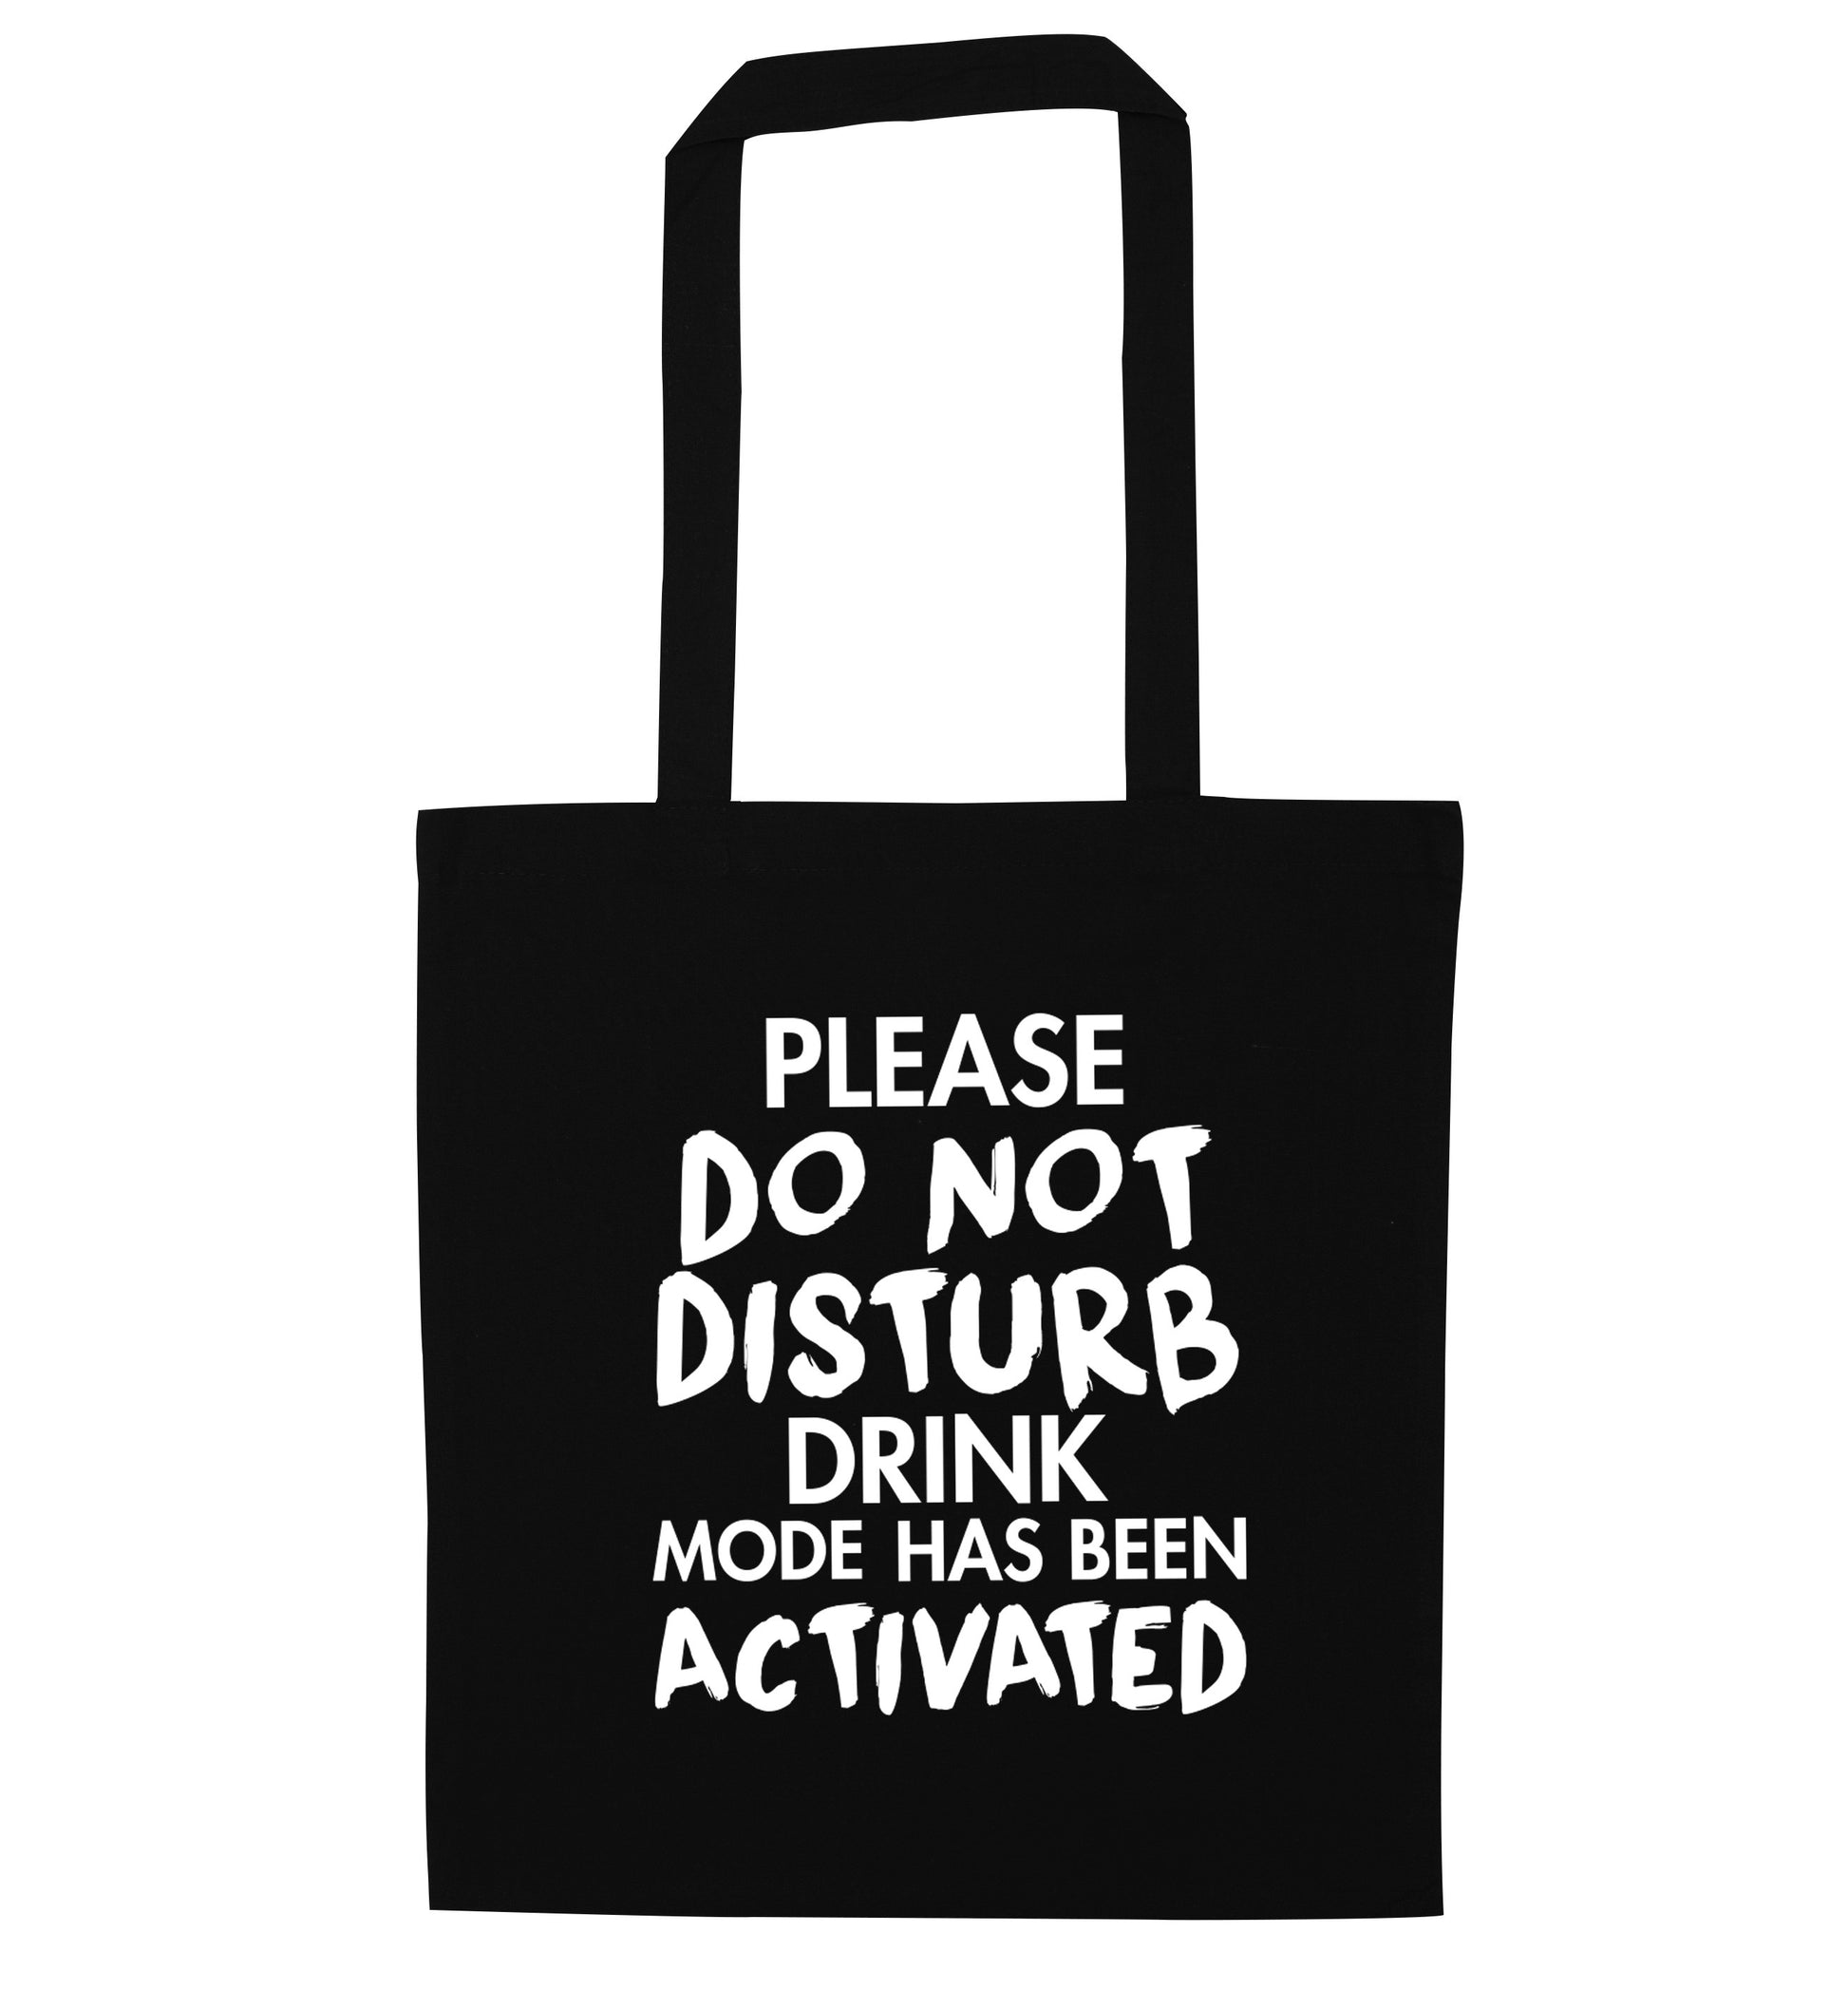 Please do not disturb drink mode has been activated black tote bag